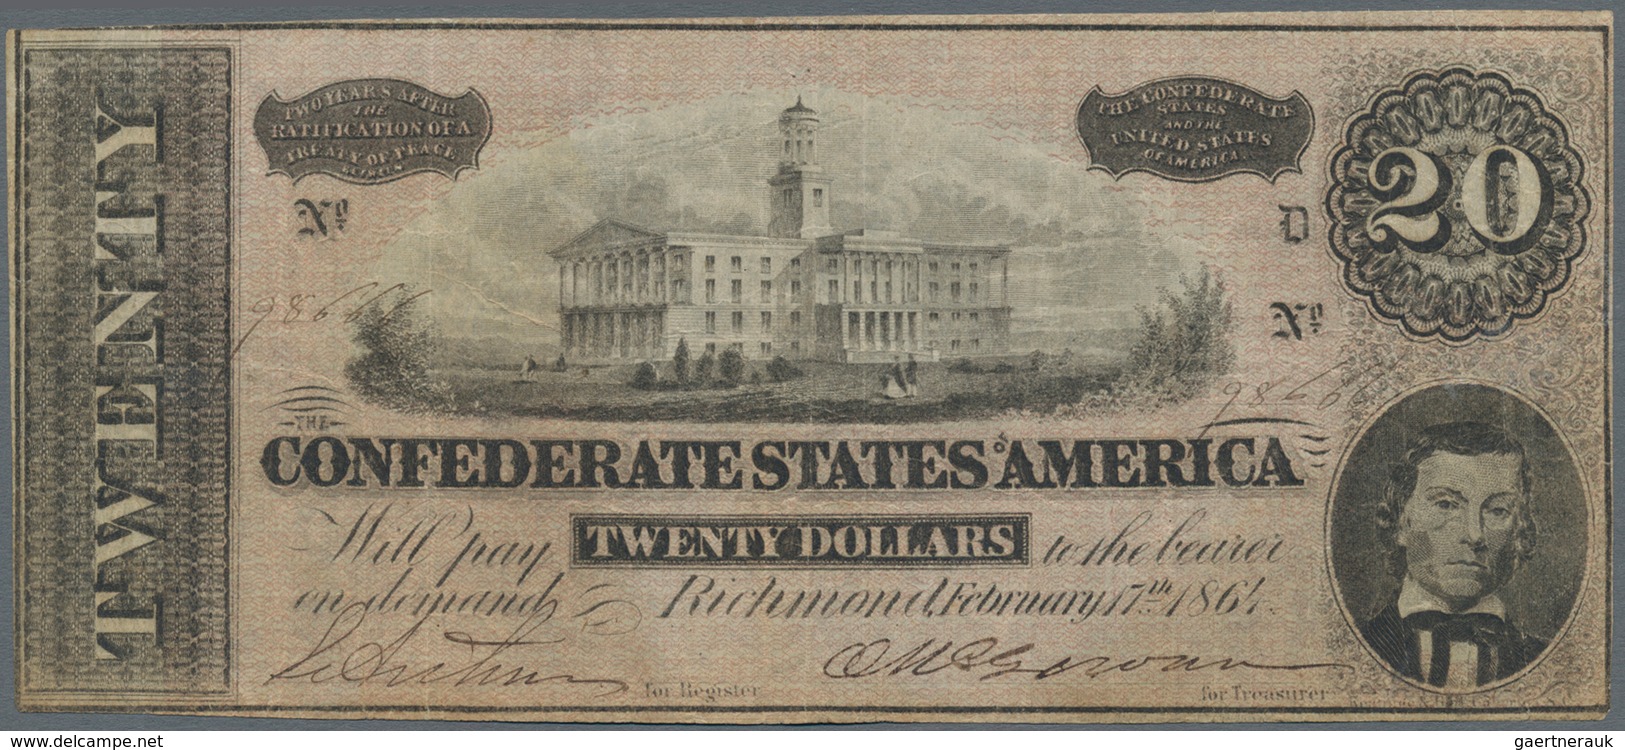 United States Of America - Confederate States: Interesting Lot With 9 Confederate Banknotes And Loan - Confederate Currency (1861-1864)